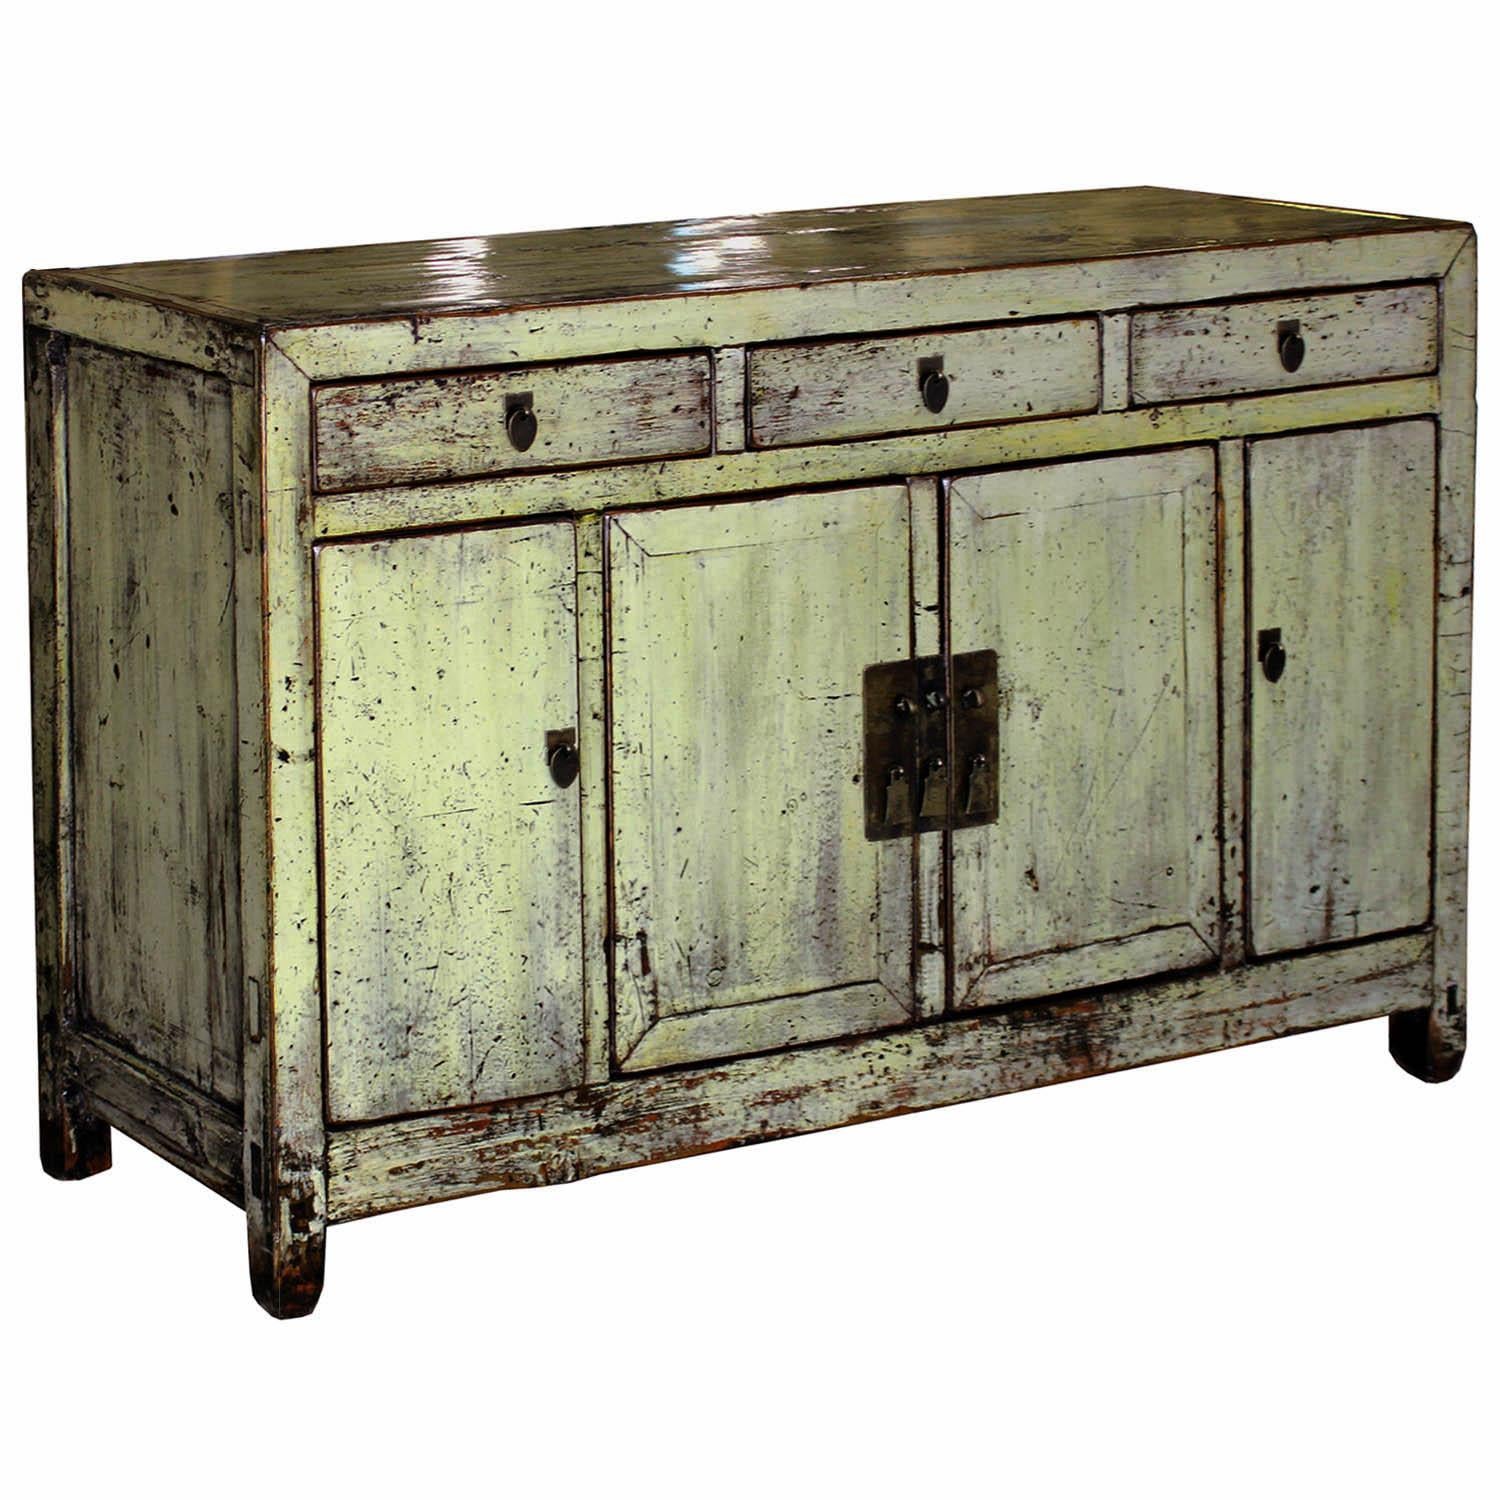 Three drawer sideboard with exposed wood edges, clean lines and ample storage can be used as a server in the dining room or in a contemporary entry way with accessories on top. New interior shelf and hardware. Dongbei, China, circa 1900.